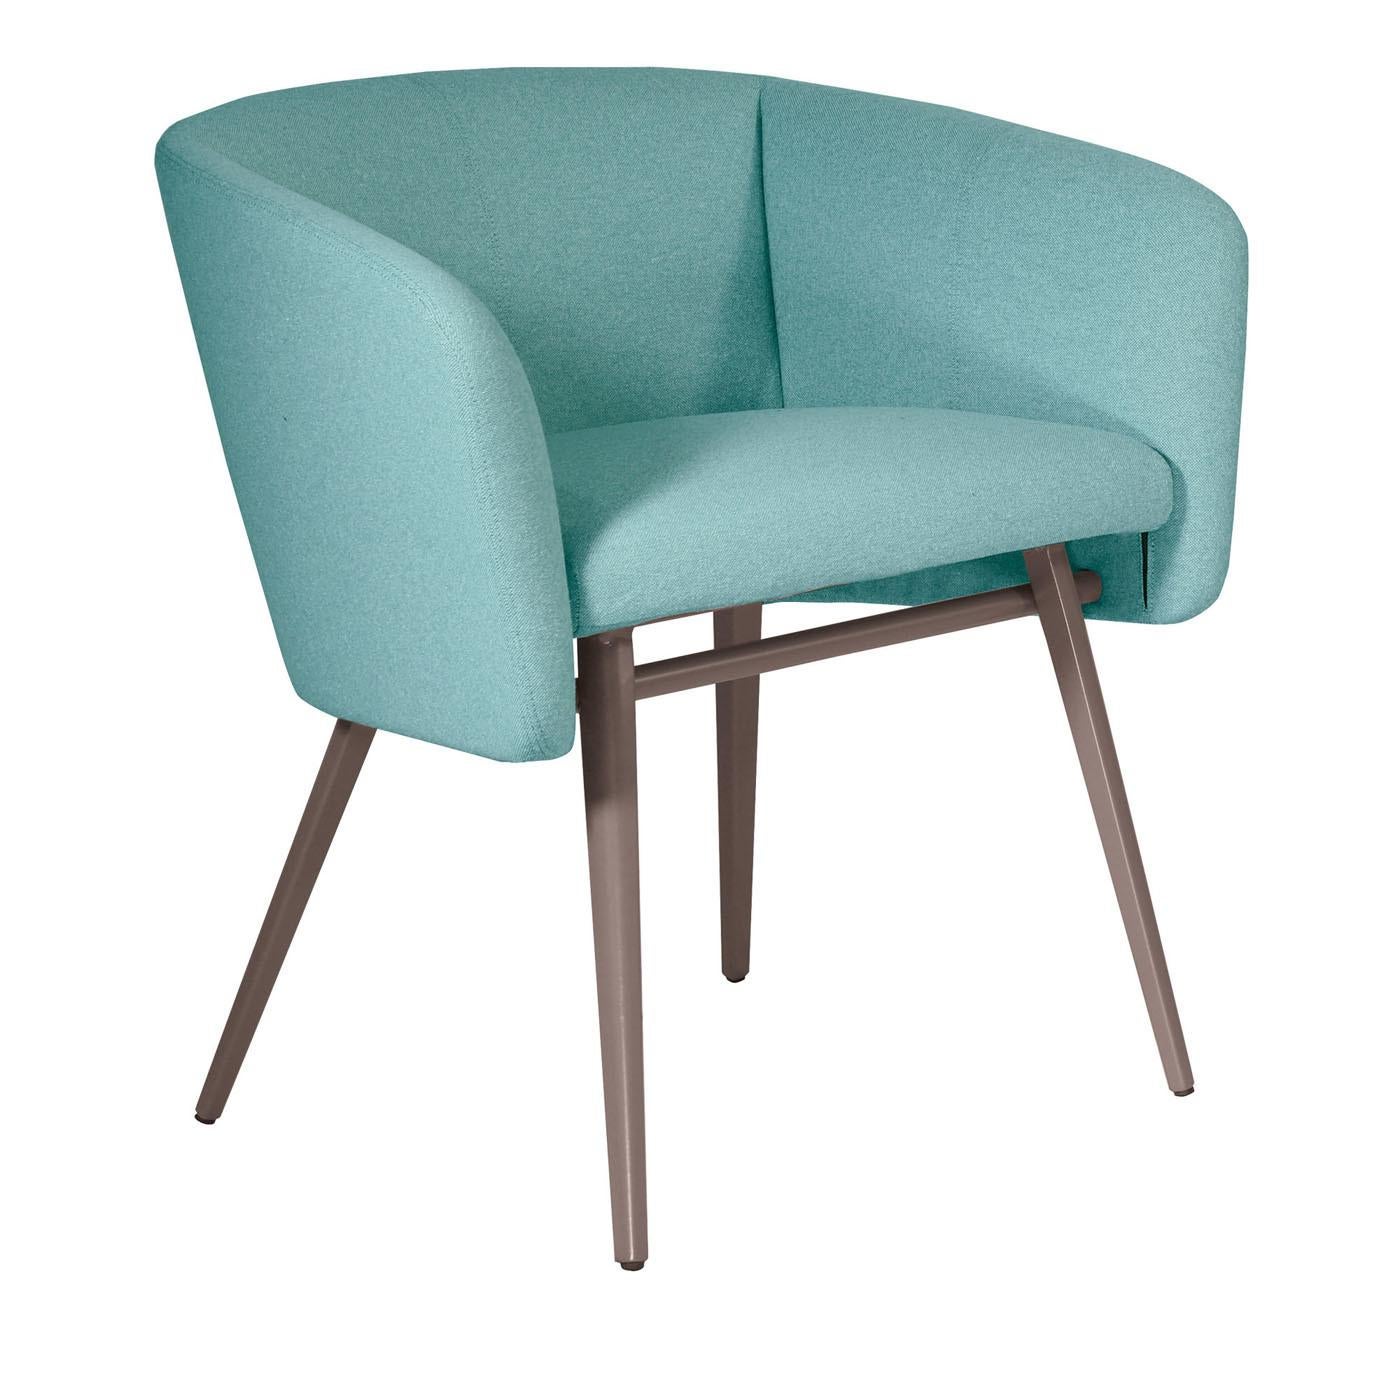 Balù Met Light Blue and Gray Chair by Emilio Nanni In New Condition For Sale In Milan, IT